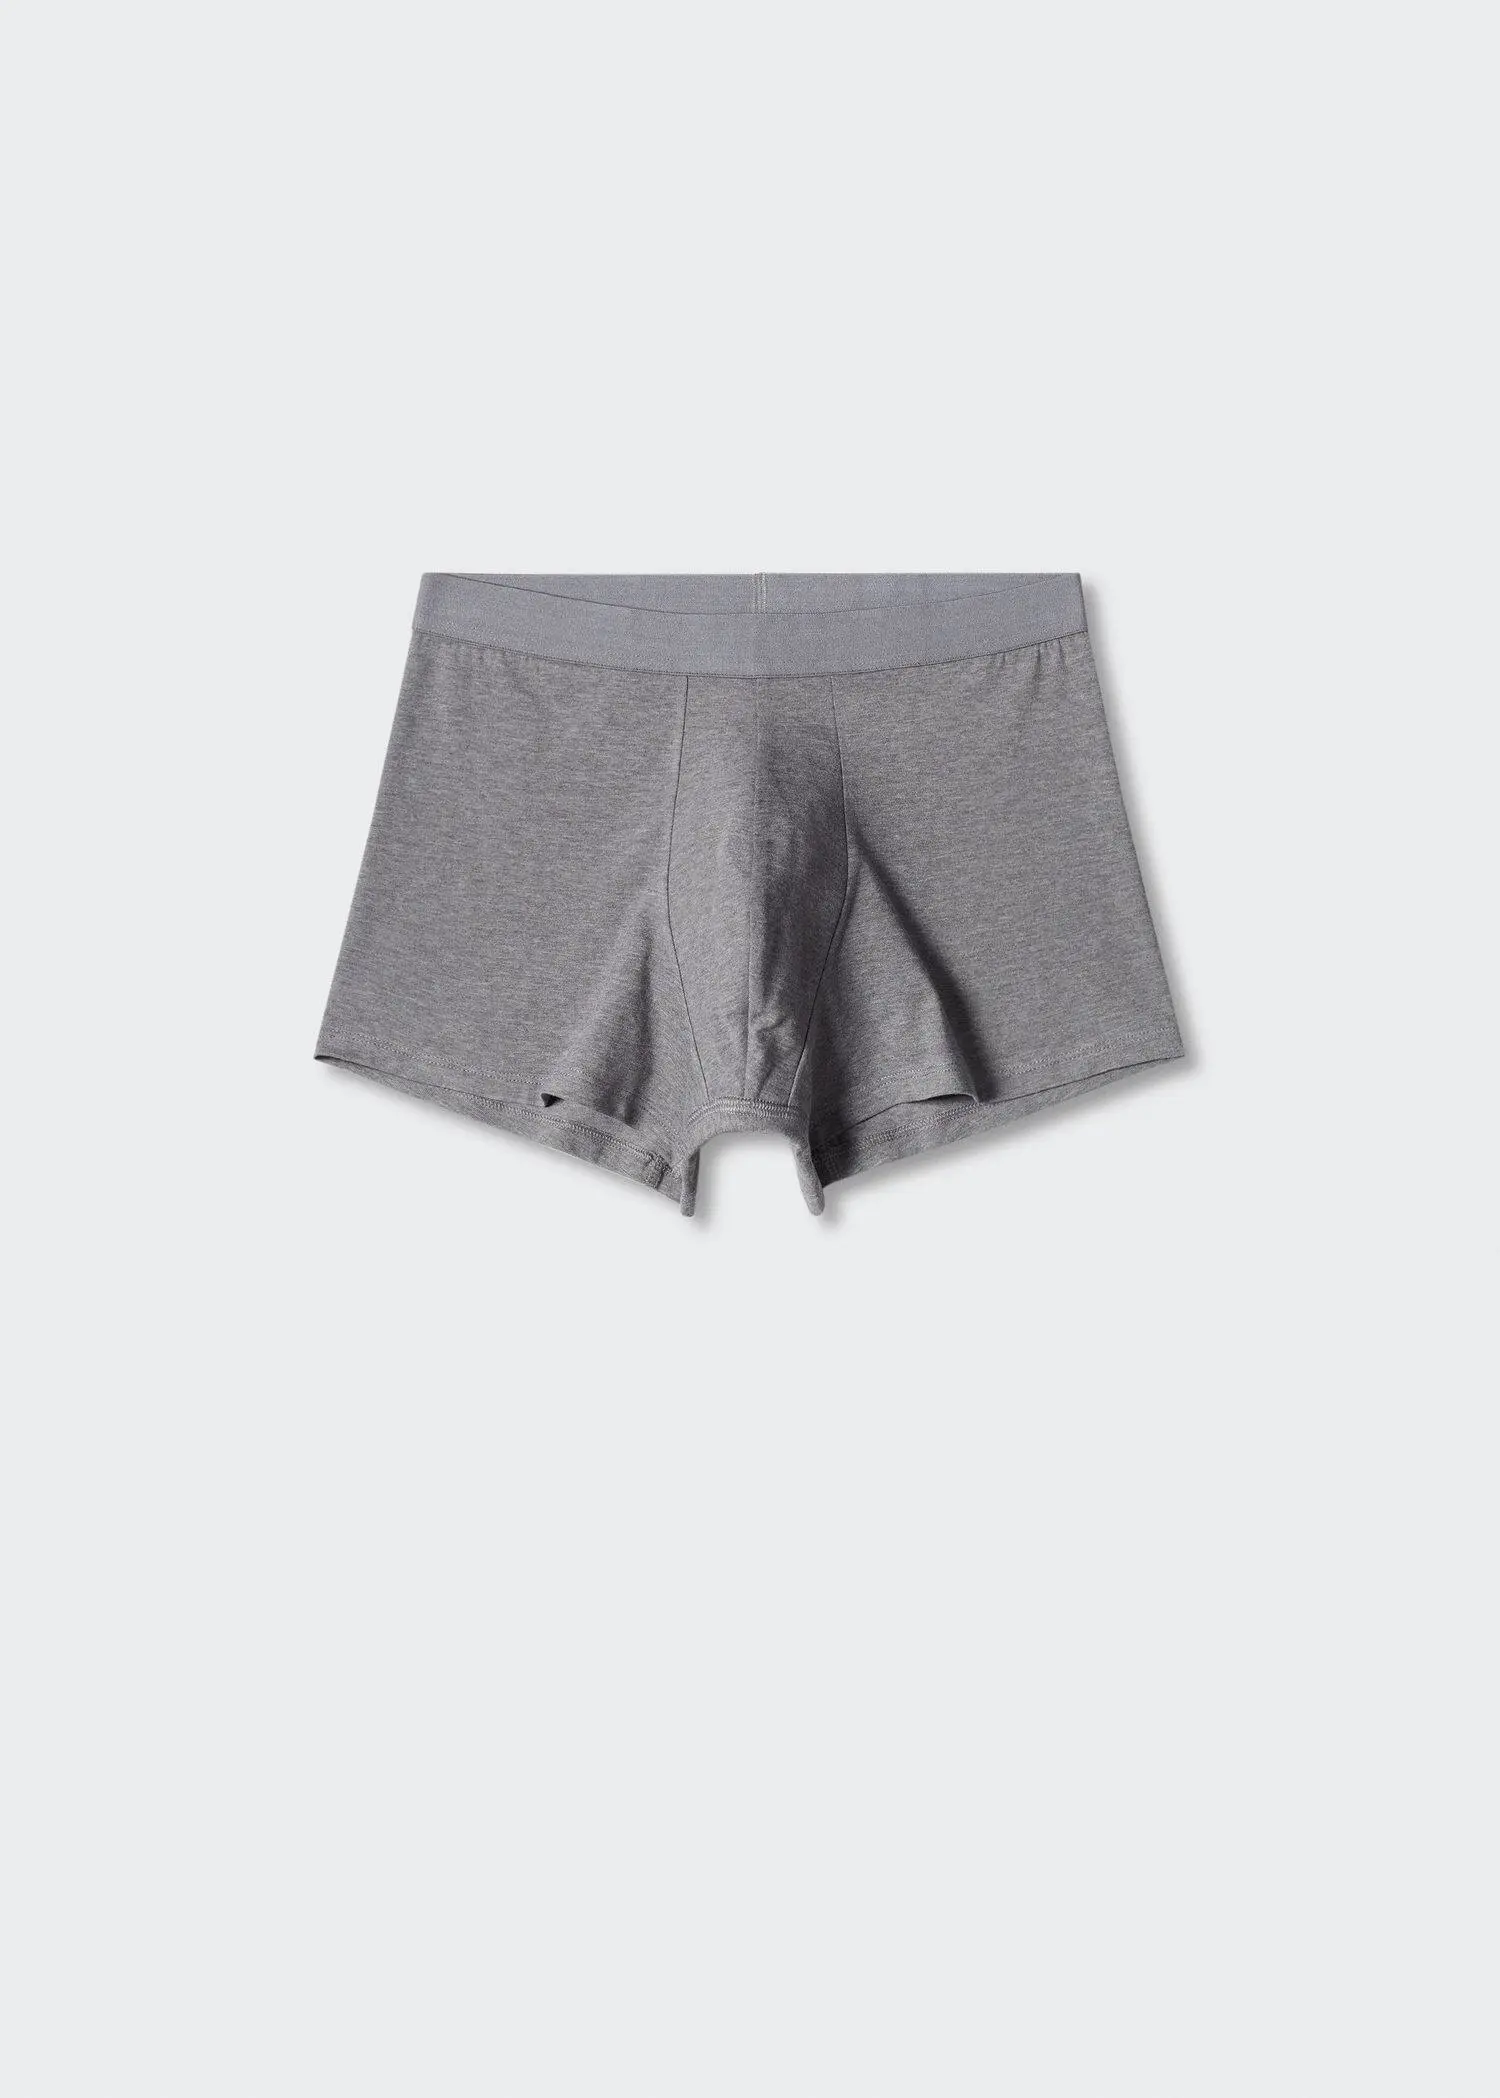 Mango Basic boxer 2 pack. a pair of gray shorts with an elastic waist band. 